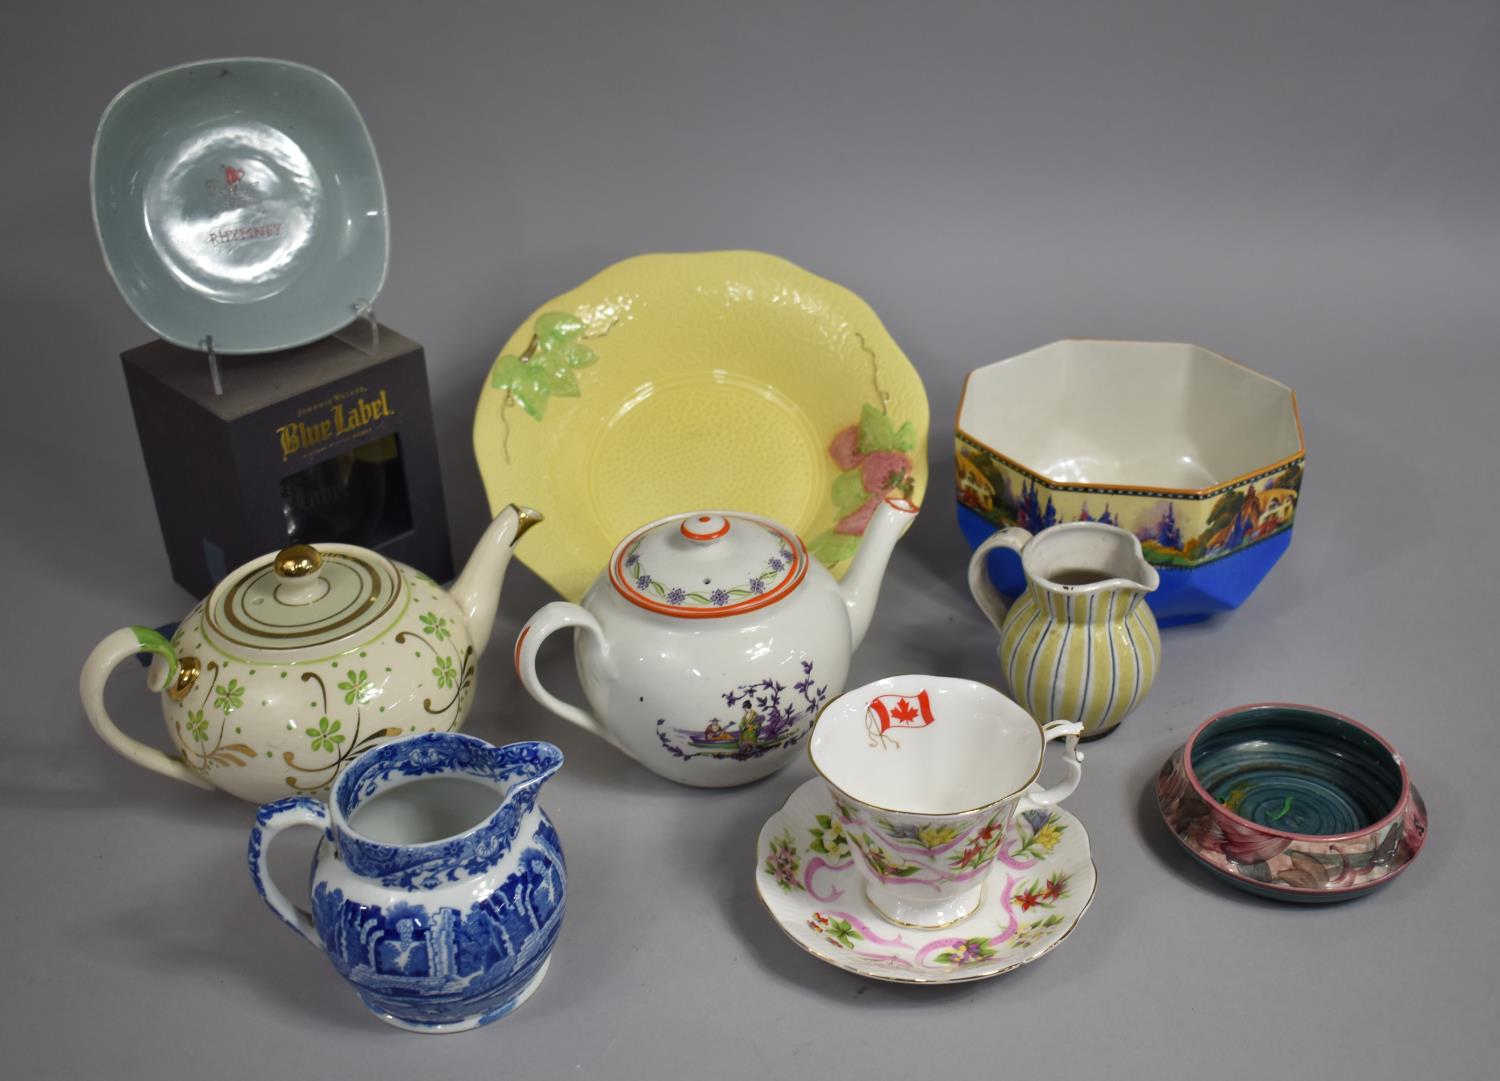 A Collection of Various Ceramics to Comprise Rhymney Advertising Ashtray, Royal Winton Melbaware